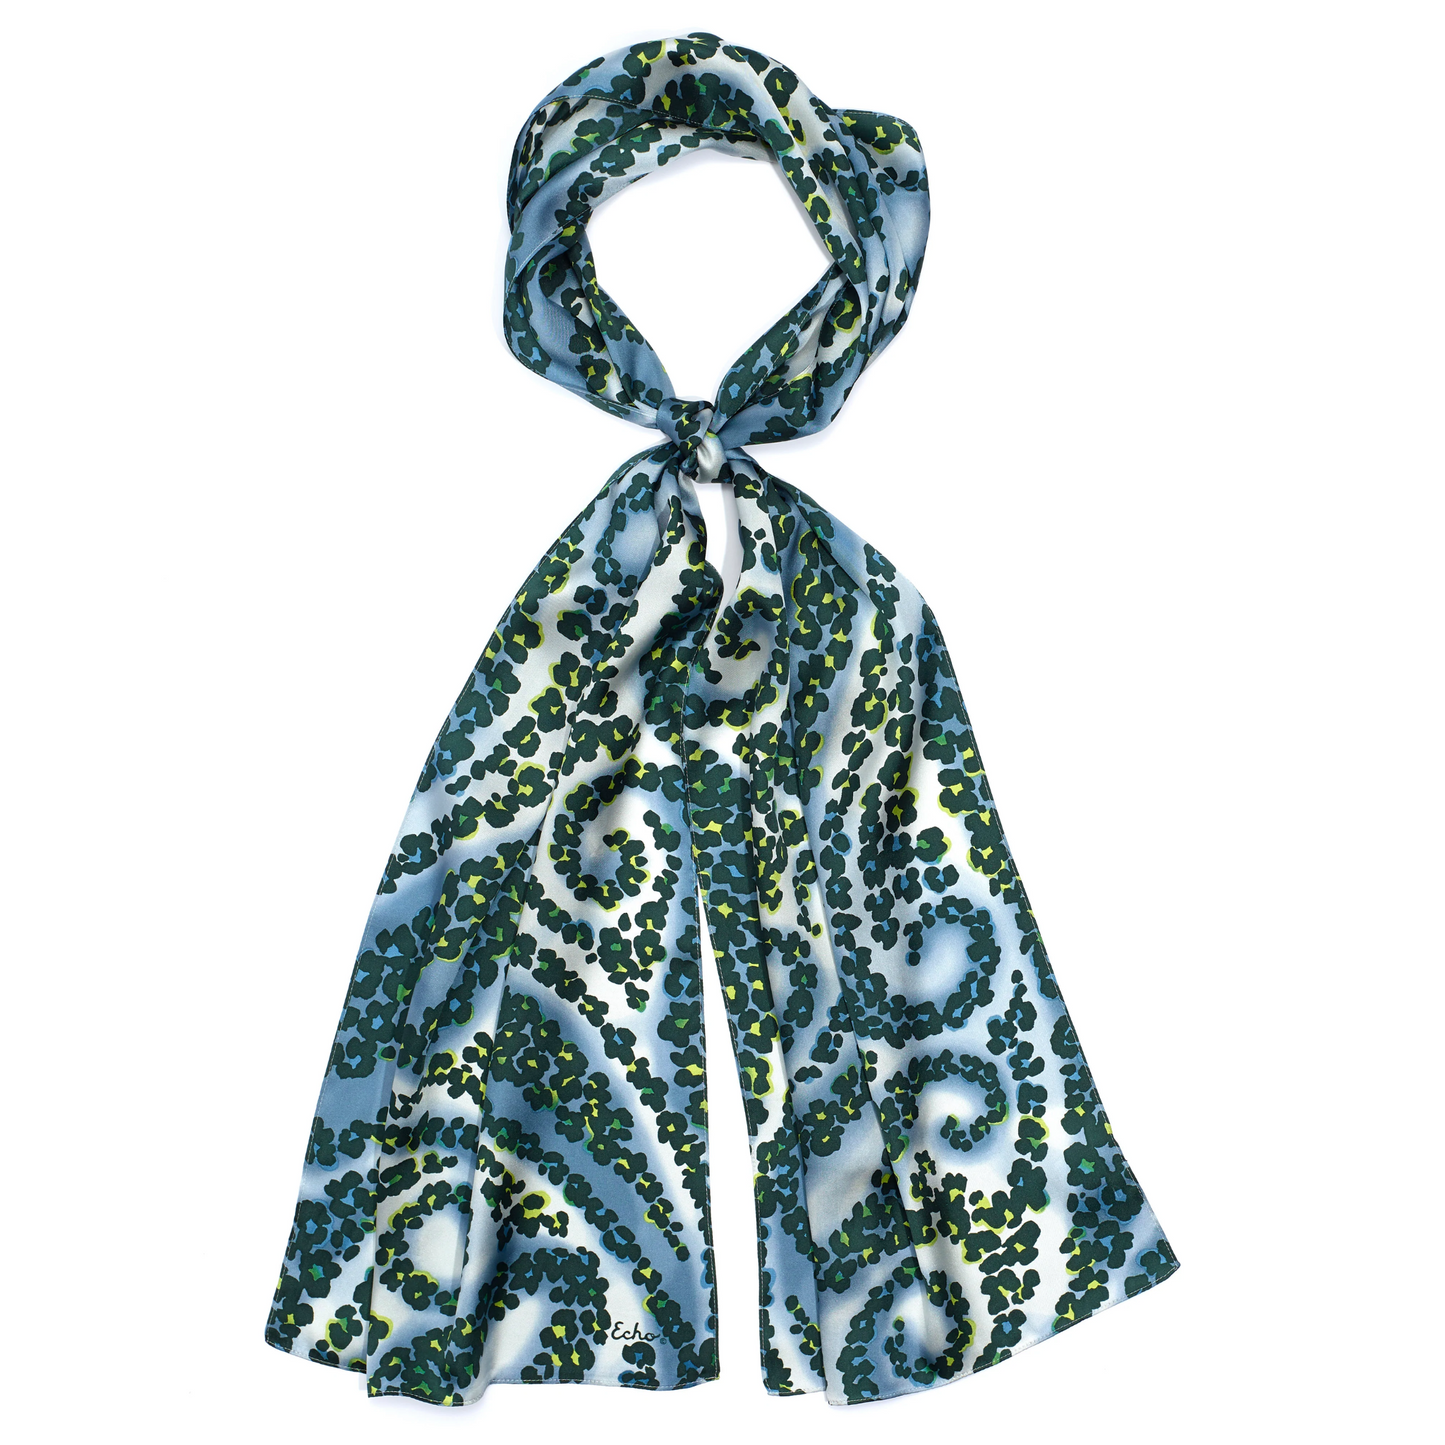 A blue and white coloured scarf is pictured with a tied loop and has green coloured spots that create a swirled pattern.